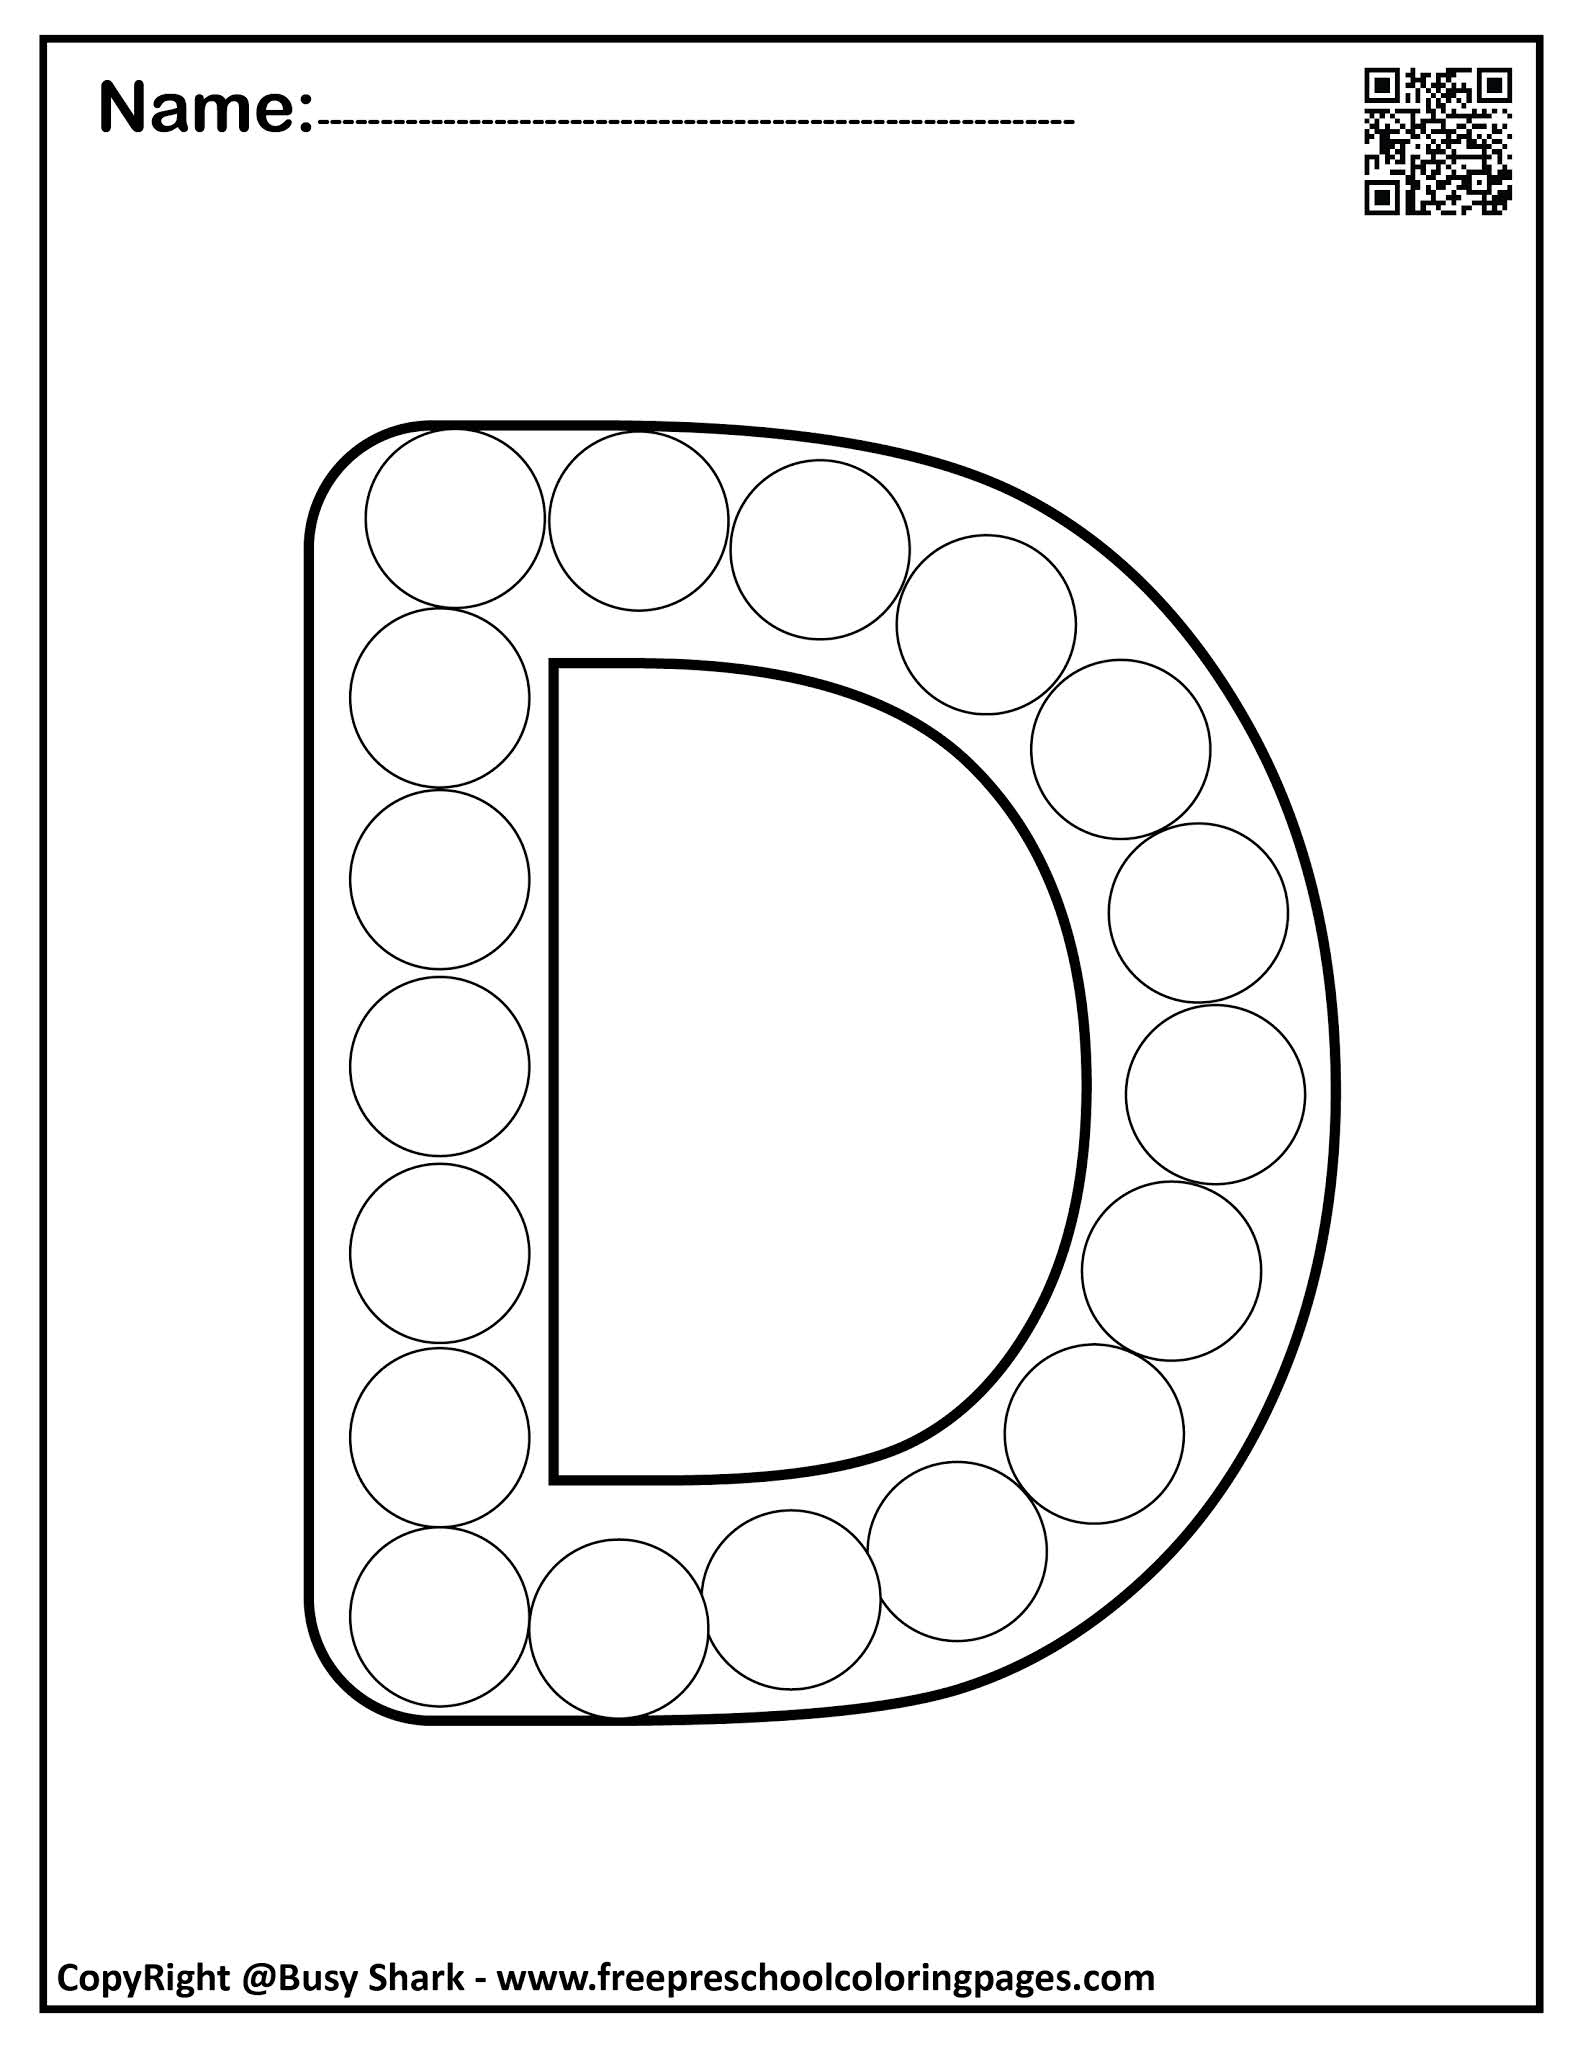 set-of-letter-d-10-free-dot-markers-coloring-pages